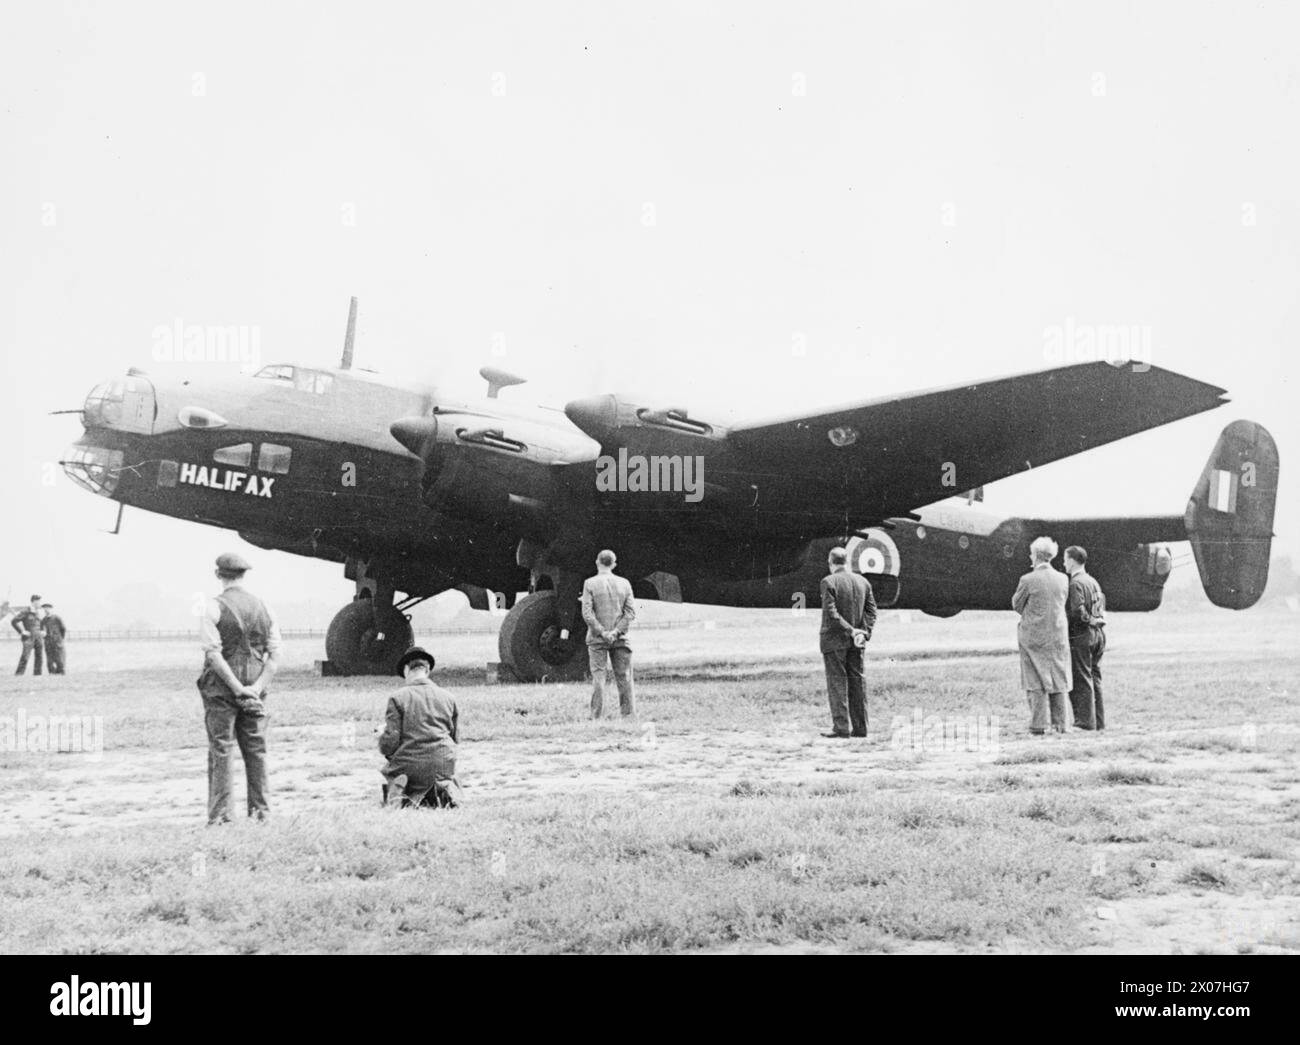 RAF BOMBER COMMAND - Handley Page Halifax Mk I L9608 at Radlett, Hertfordshire, following an official naming ceremony at the Handley Page factory by Lady Halifax, 12 September 1941. The aircraft subsequently served with No. 35 Squadron RAF and No. 1652 Heavy Conversion Unit before being written off in November 1942 Stock Photo